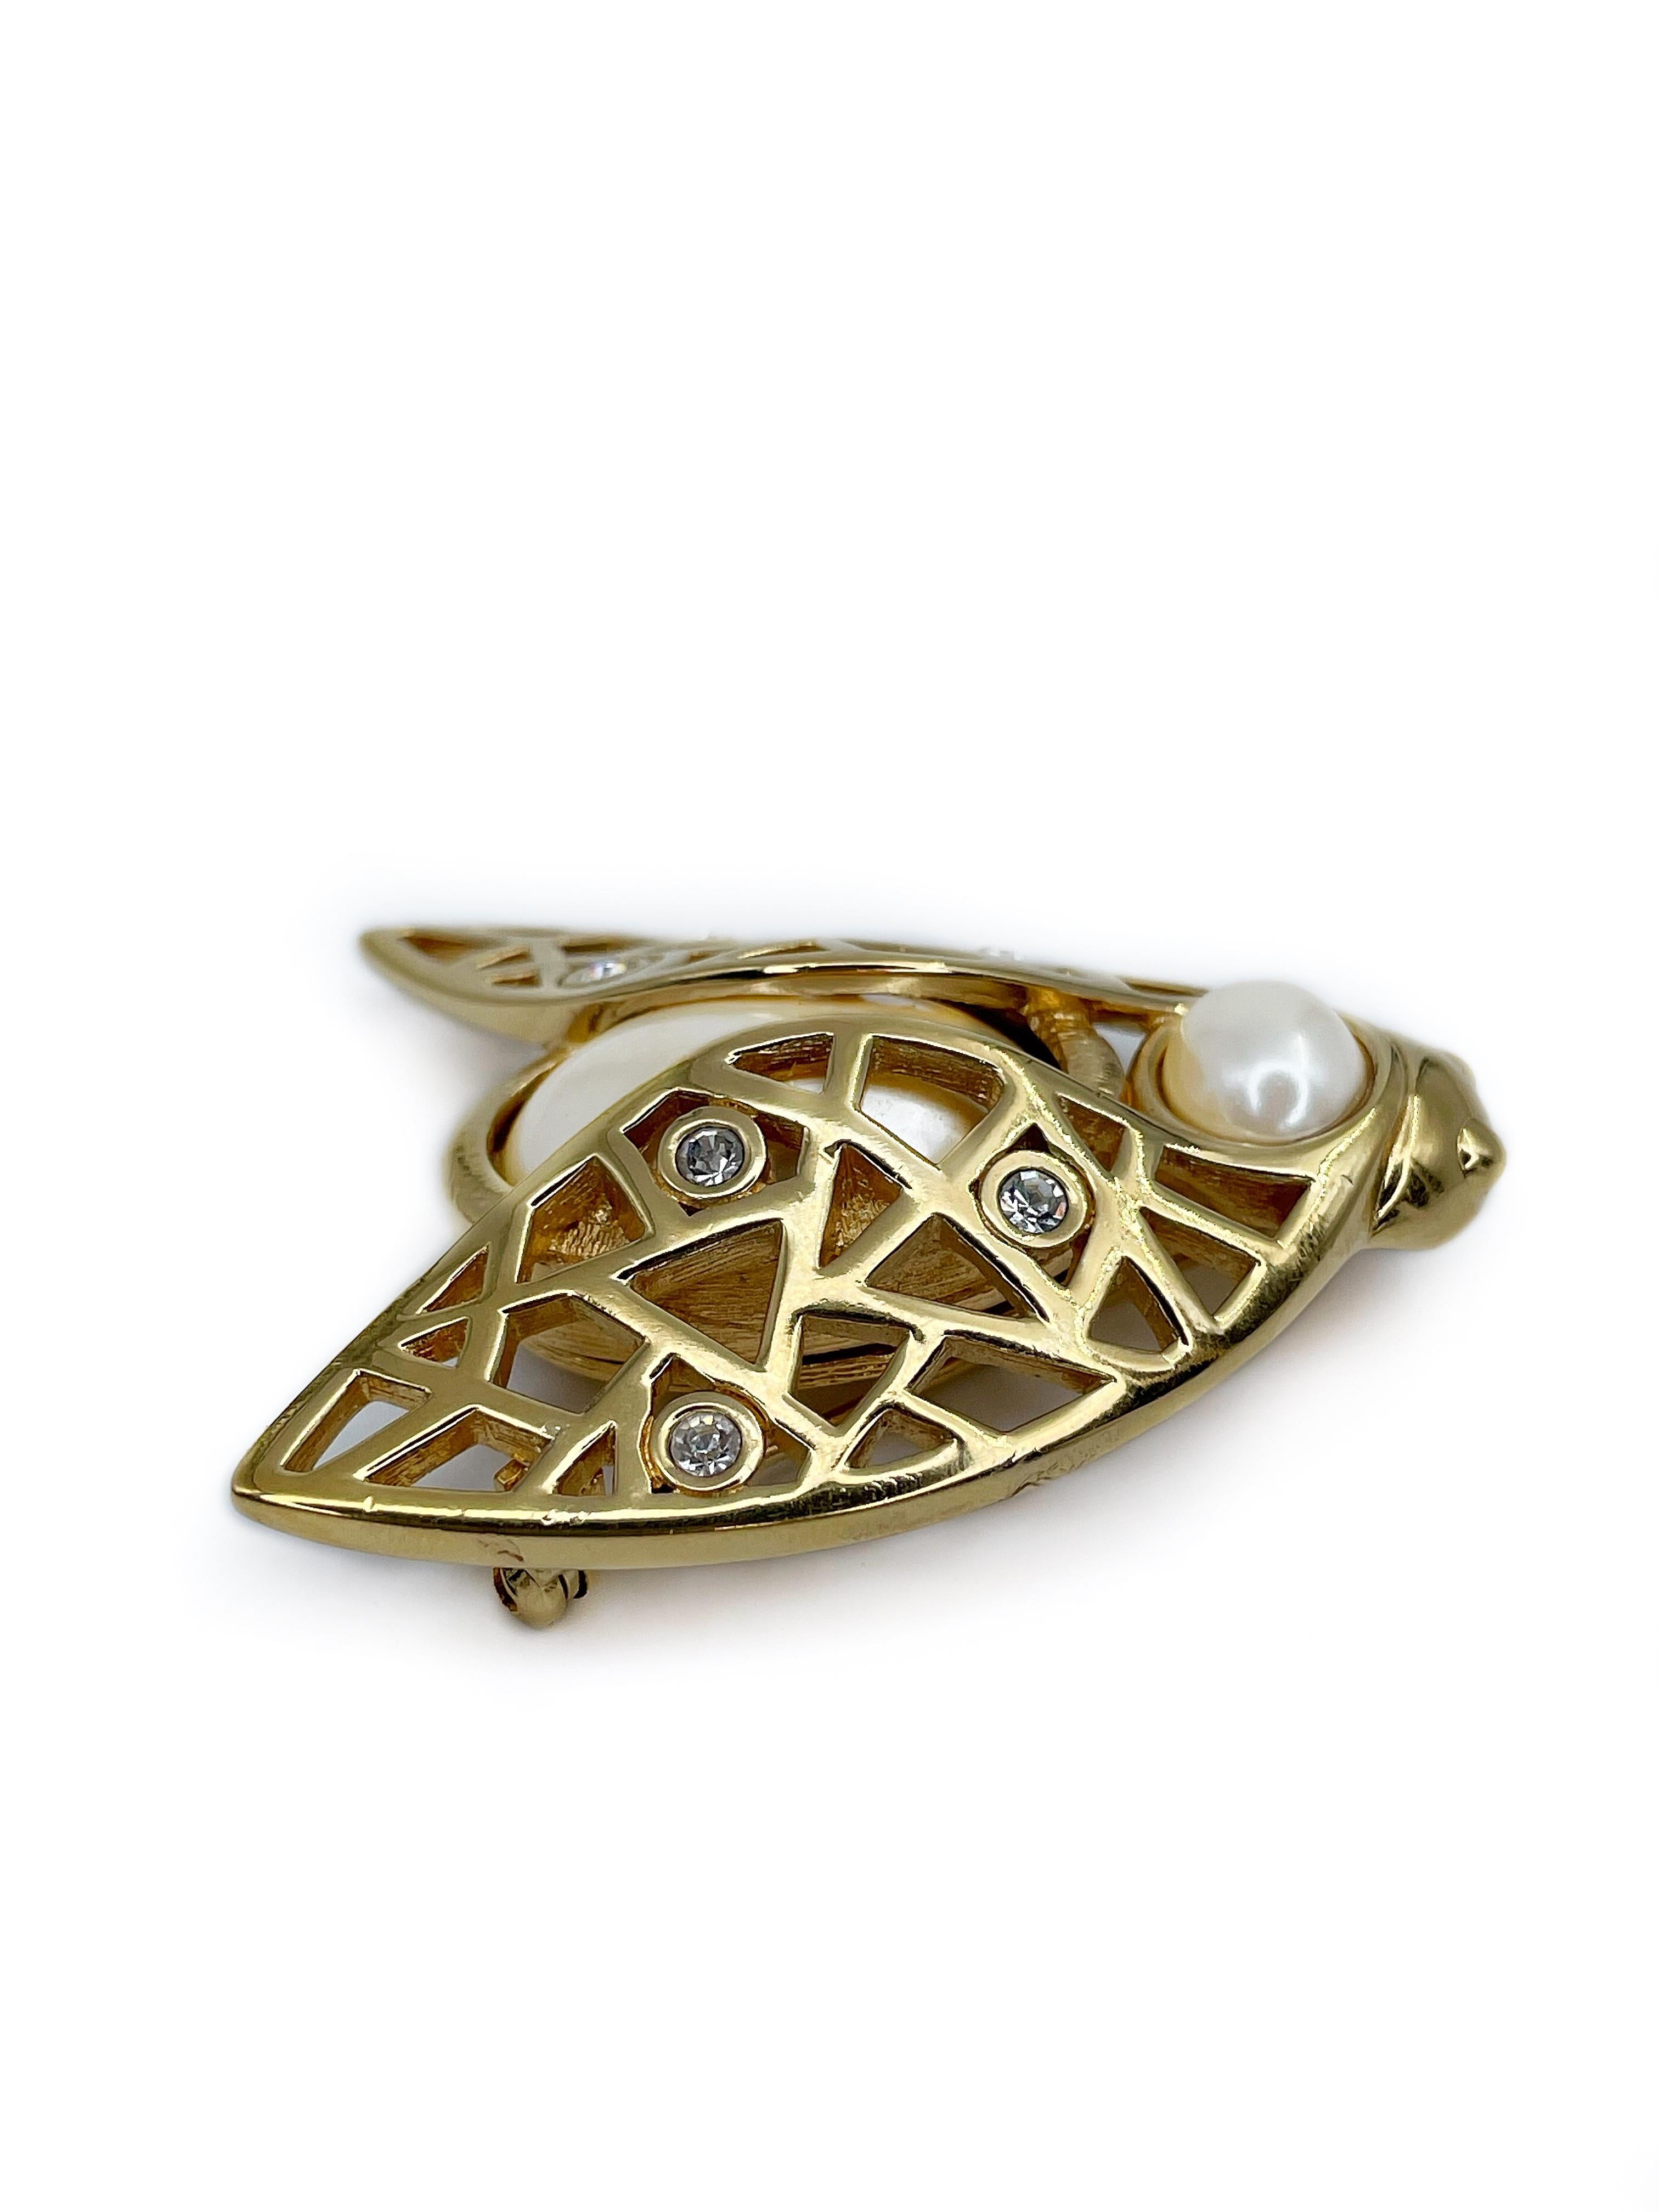 Contemporary Vintage Christian Dior Gold Tone Pearl Crystal Insect Pin Brooch